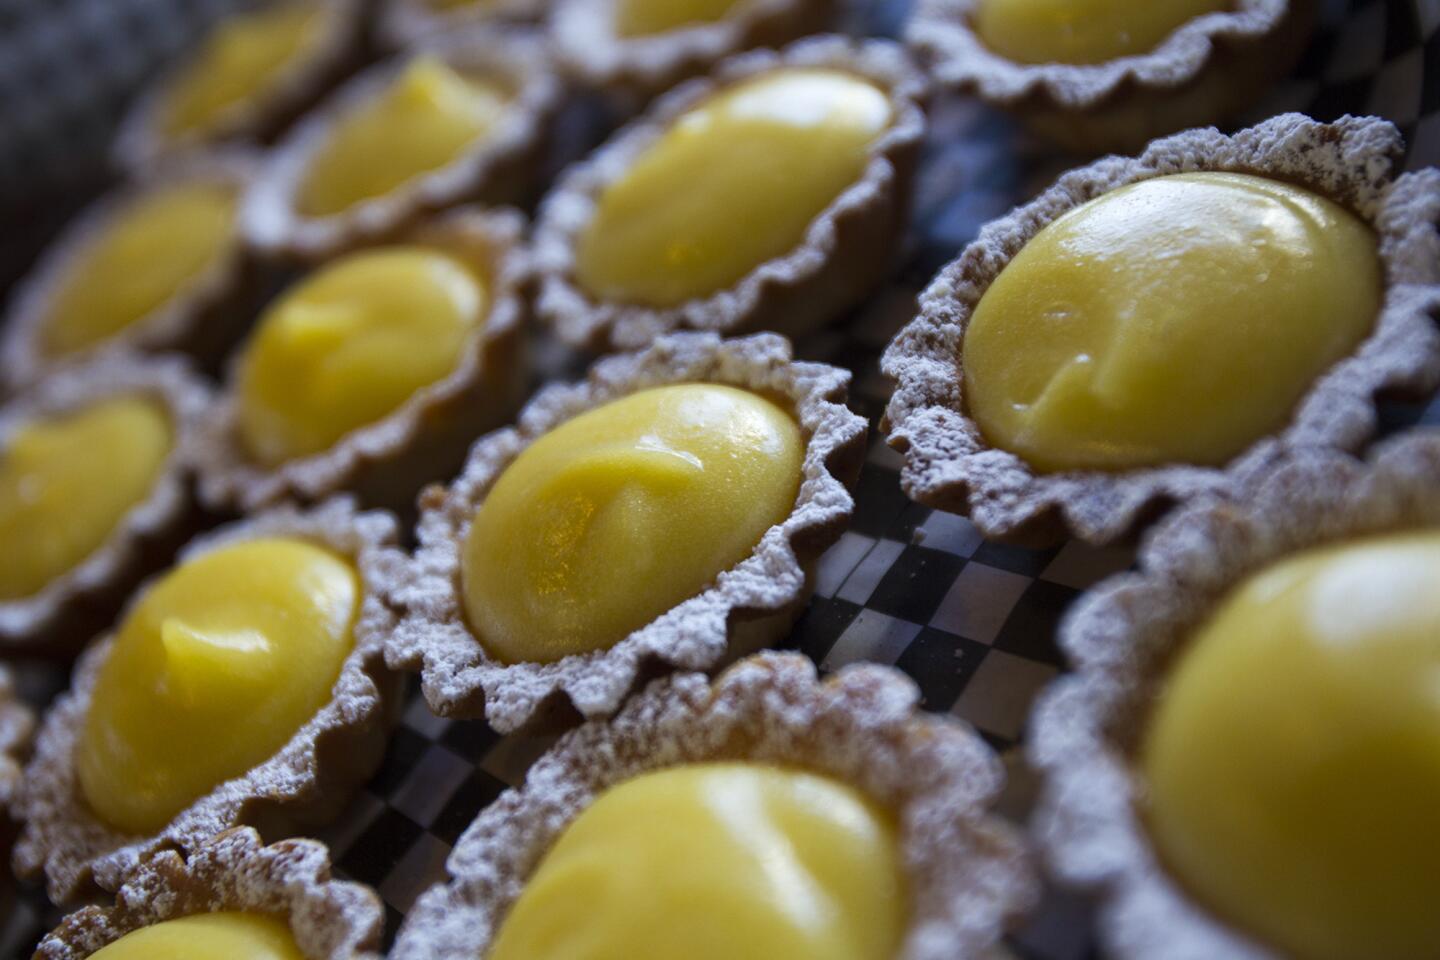 Lemon custard filled tarts are some of the samples that the Blackmarket Bakery had for the one-year anniversary on Saturday, January 25. (Scott Smeltzer, Daily Pilot)